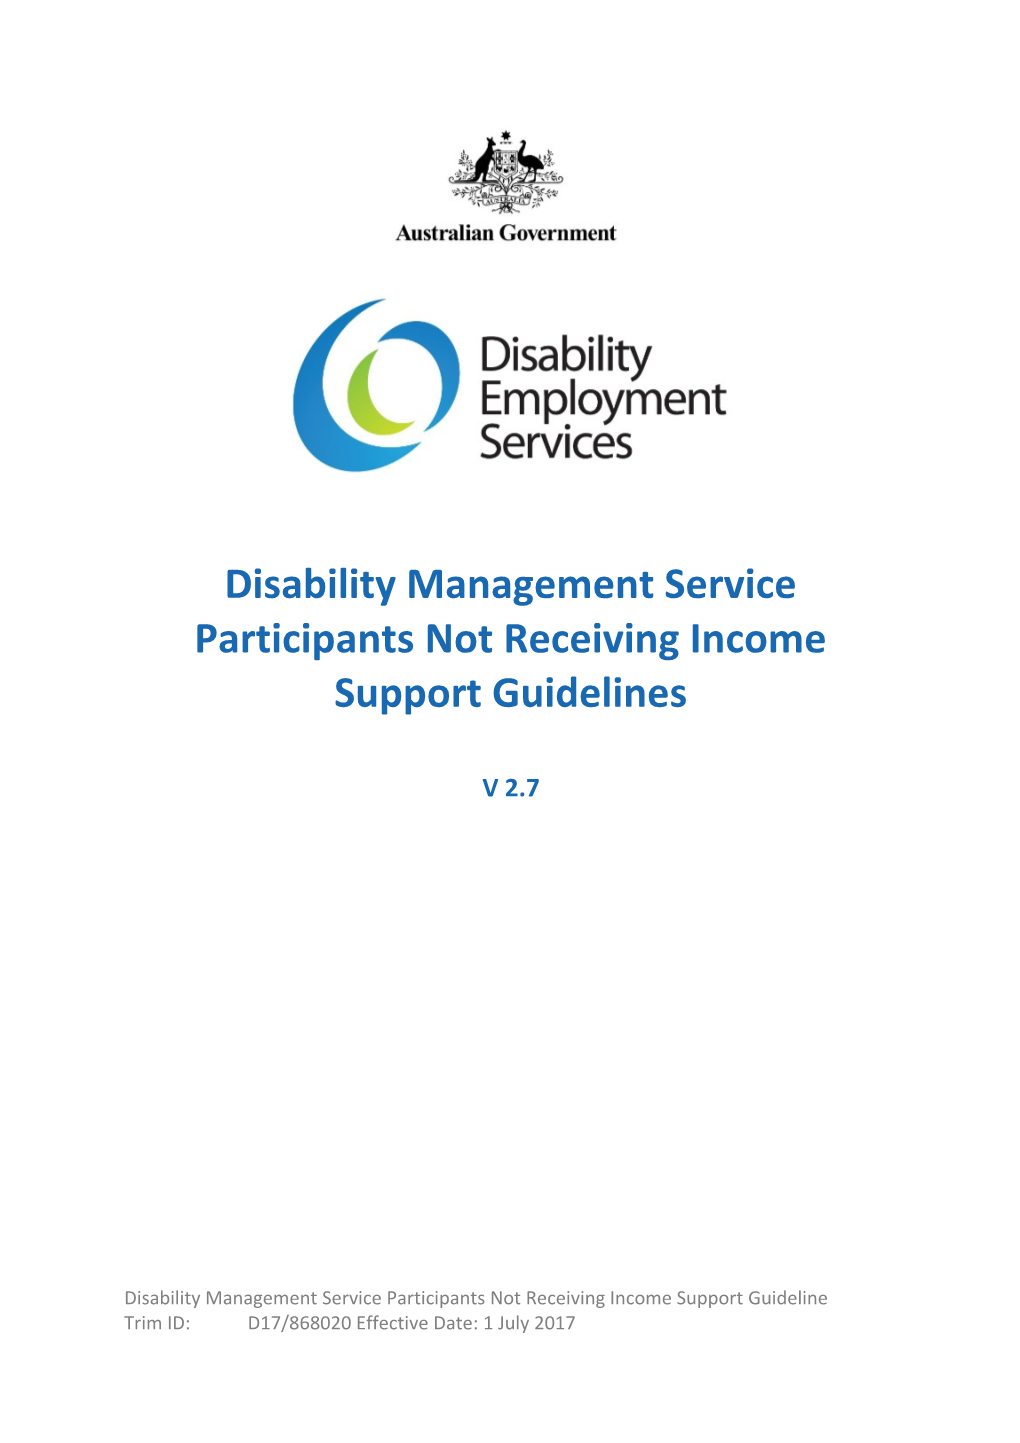 Disability Management Service Participants Not Receiving Income Support Guidelines V2.7